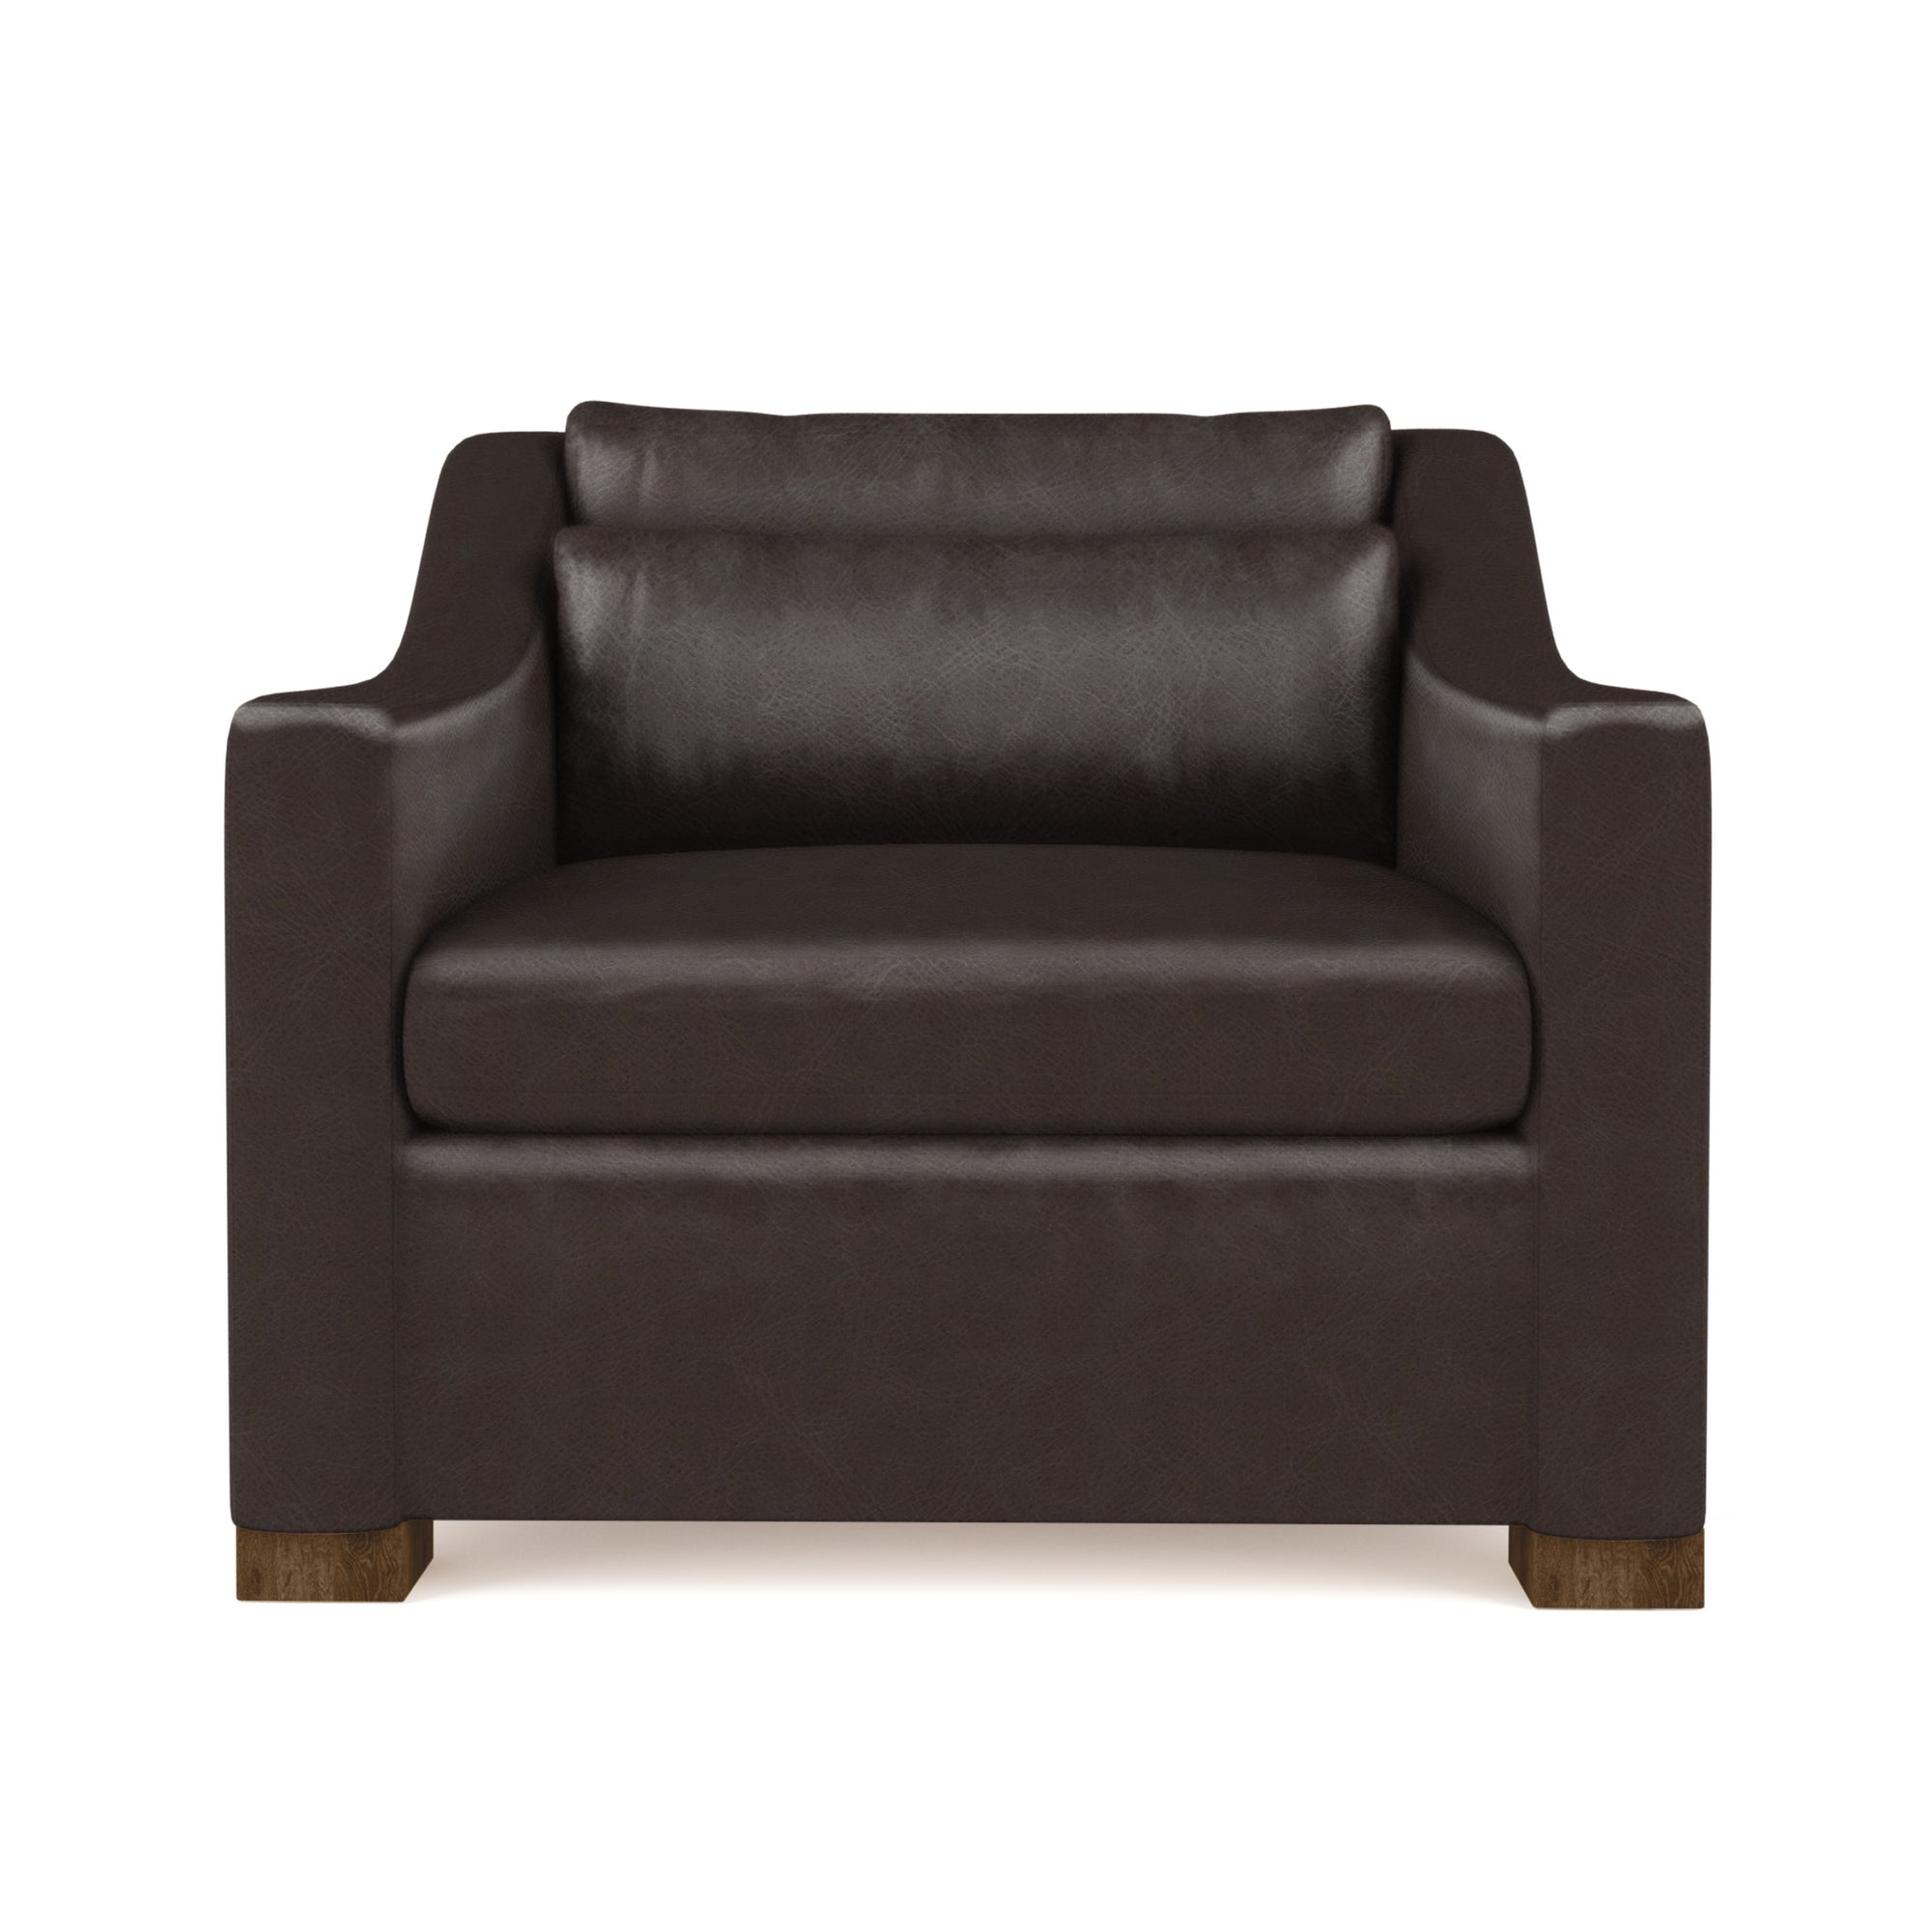 Crosby Chair - Chocolate Vintage Leather